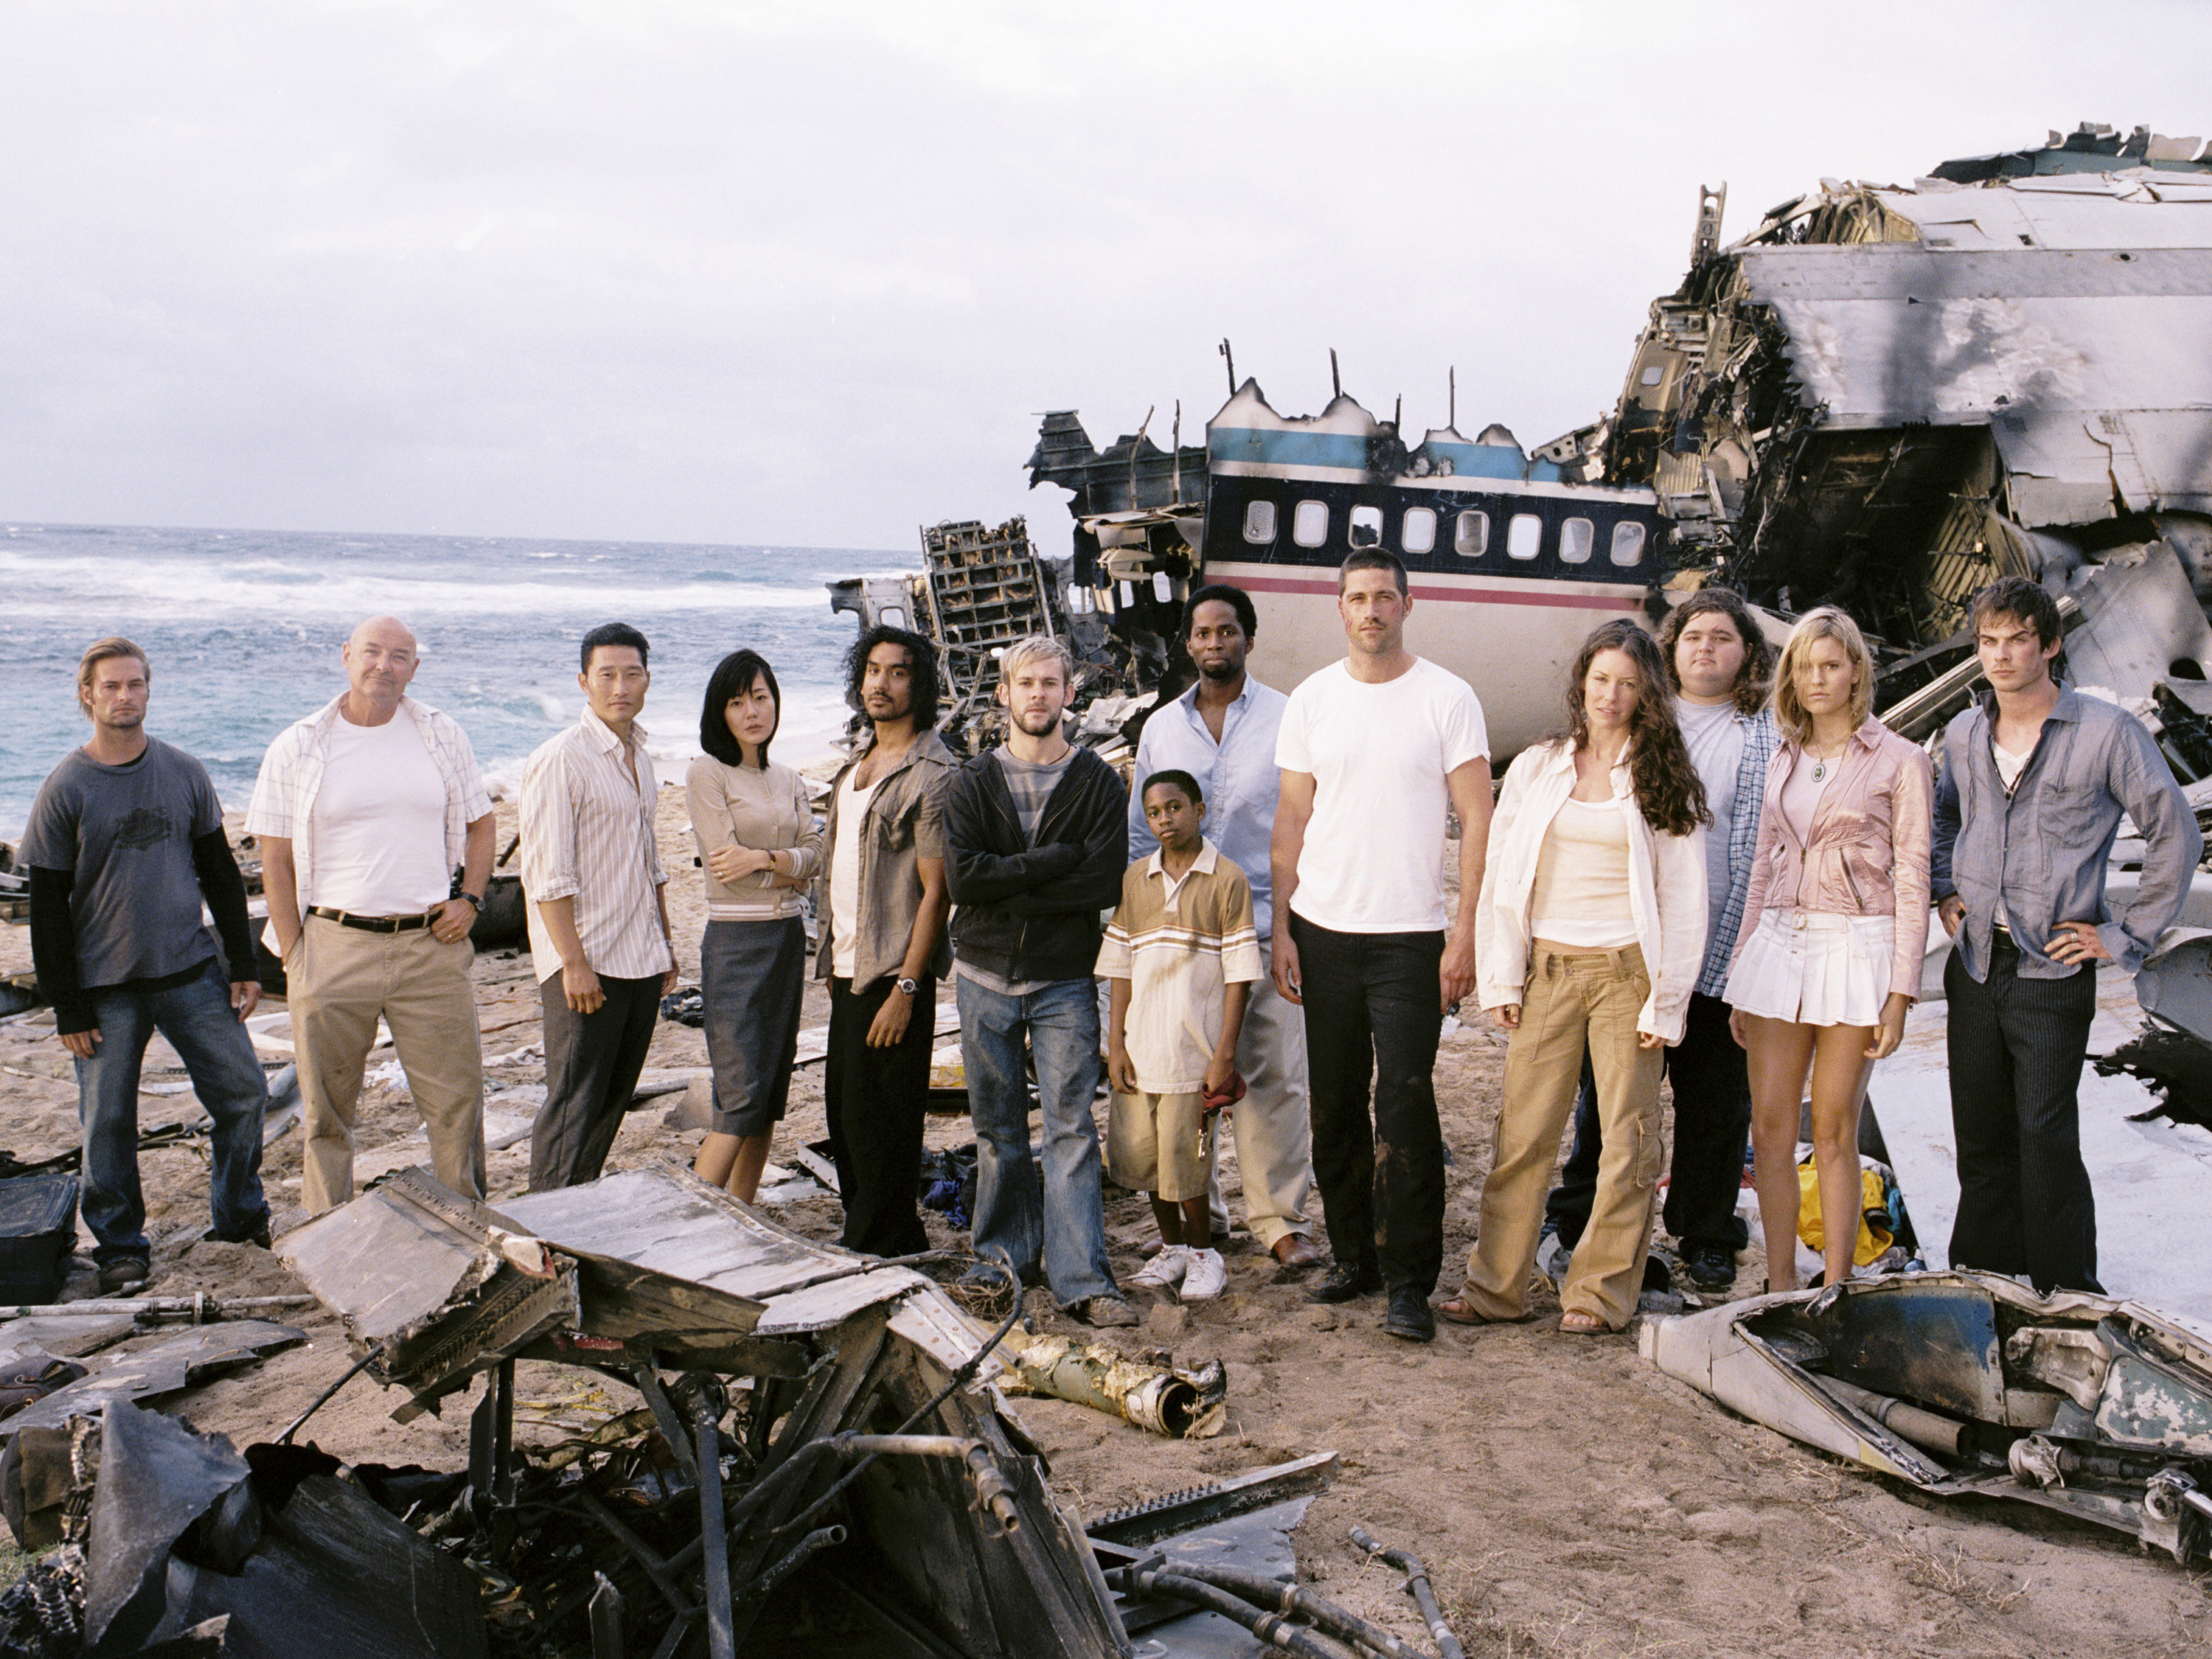 the cast of Lost in the crash site